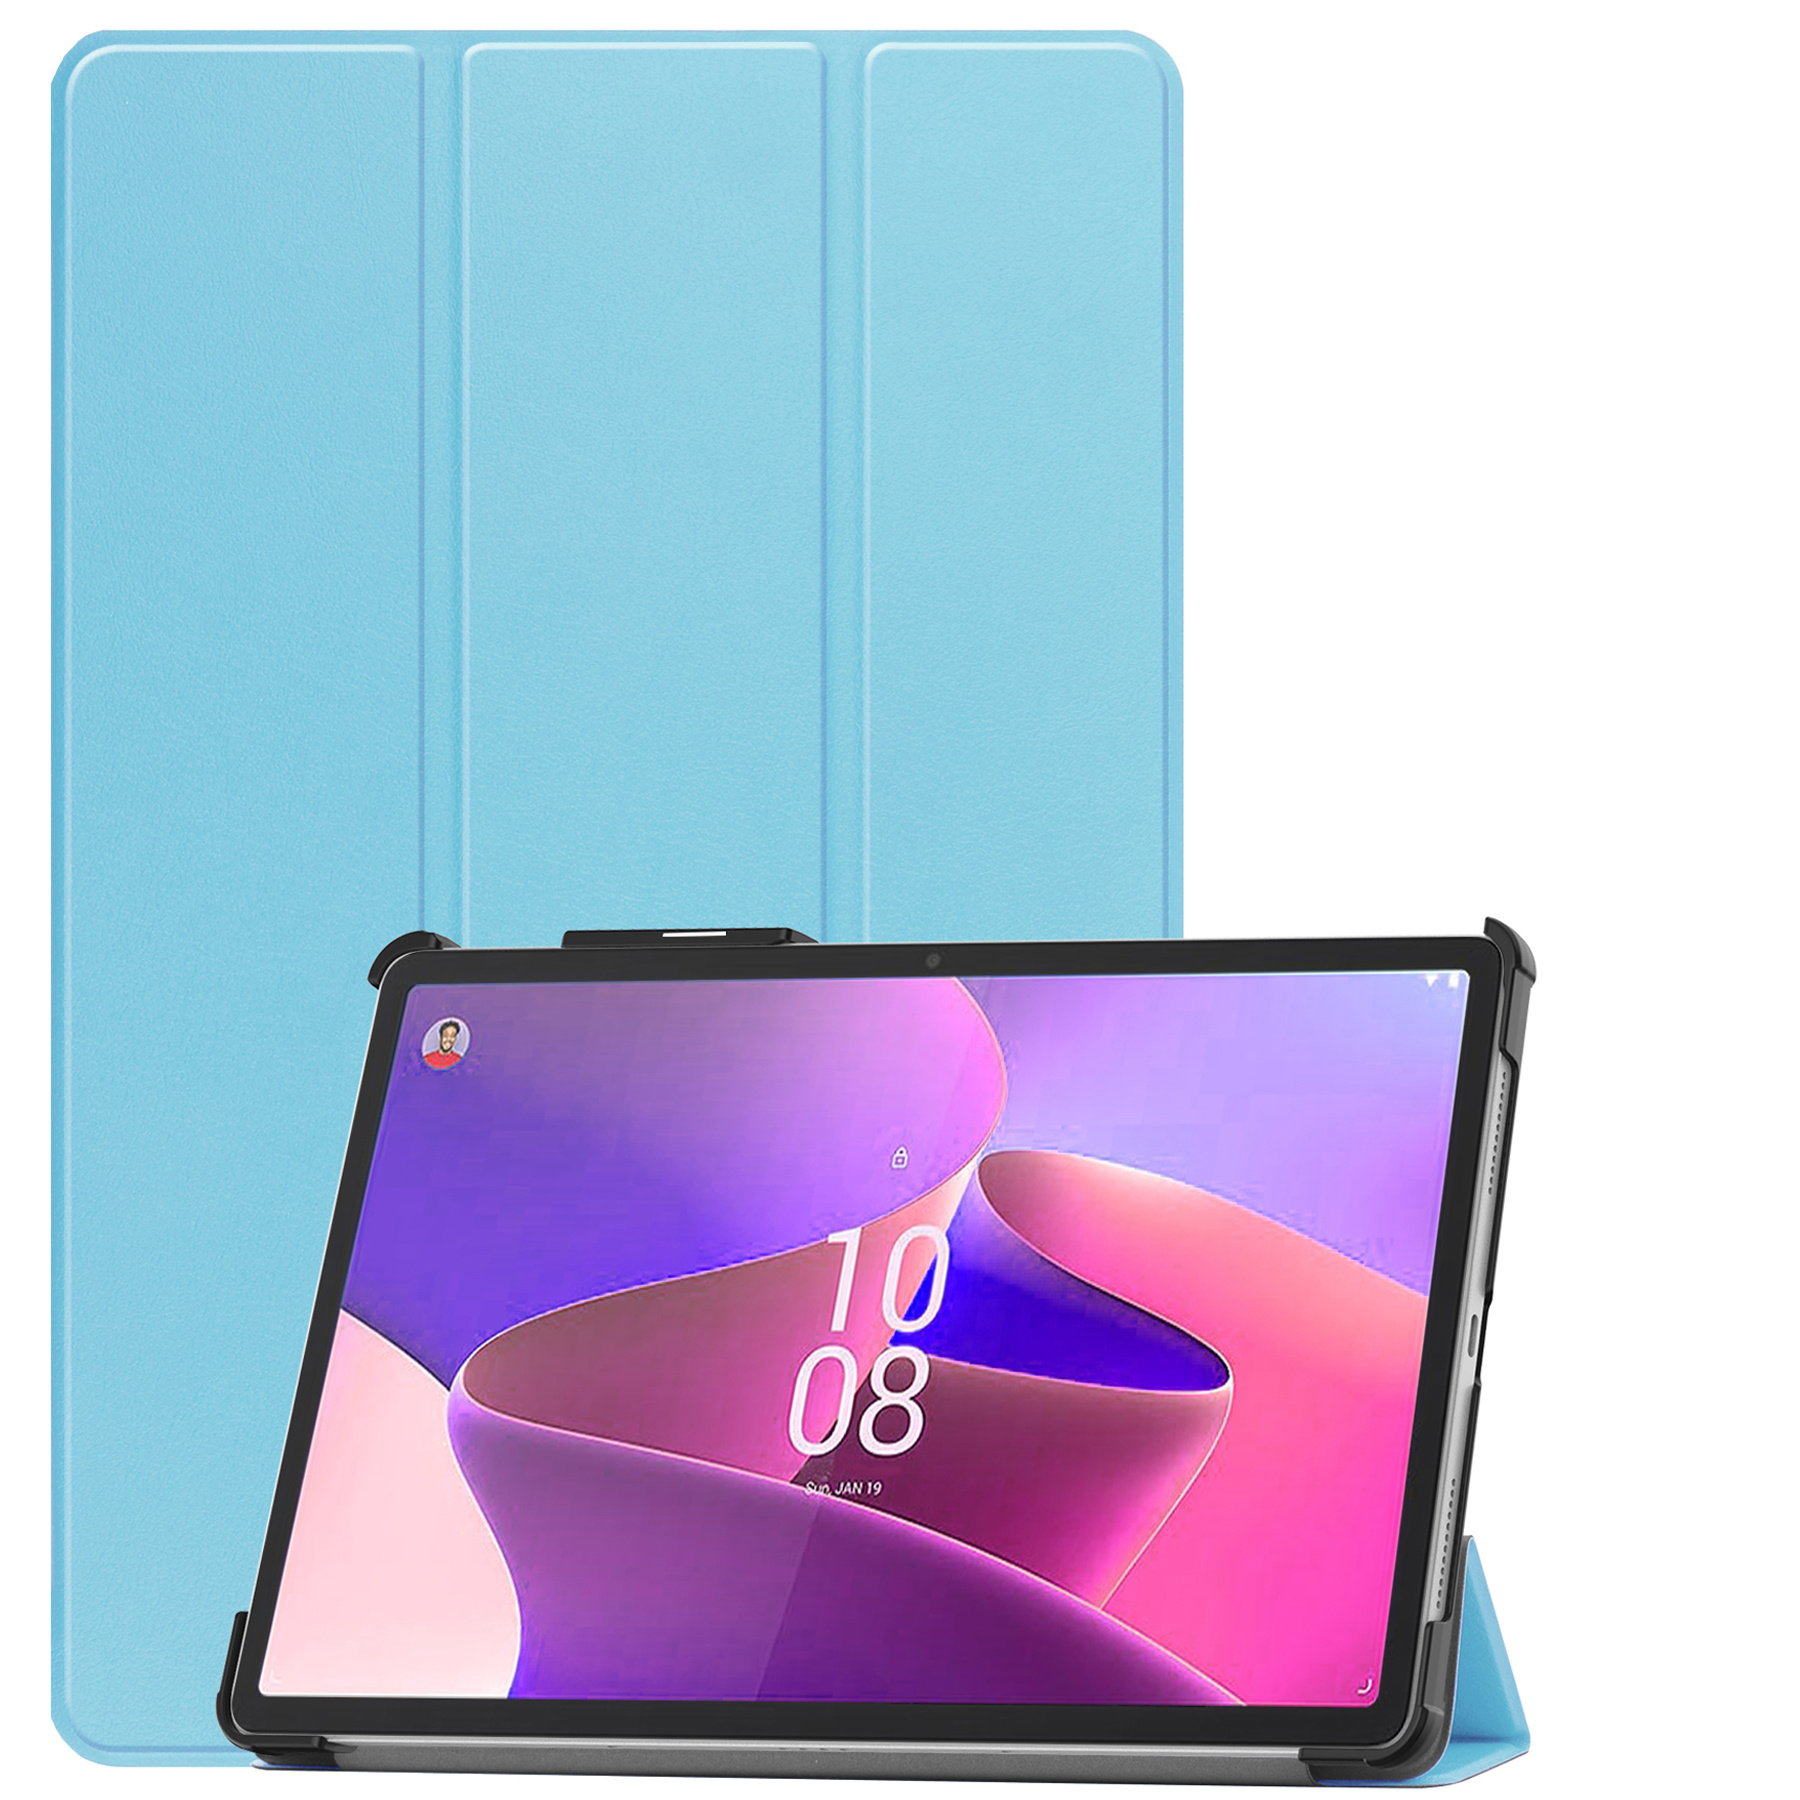 Nomfy Hoes Geschikt voor Lenovo Tab P11 Pro Hoes Tri-fold Tablet Hoesje Case Met Uitsparing Geschikt voor Lenovo Pen - Hoesje Geschikt voor Lenovo Tab P11 Pro Hoesje Hardcover Bookcase - Lichtblauw